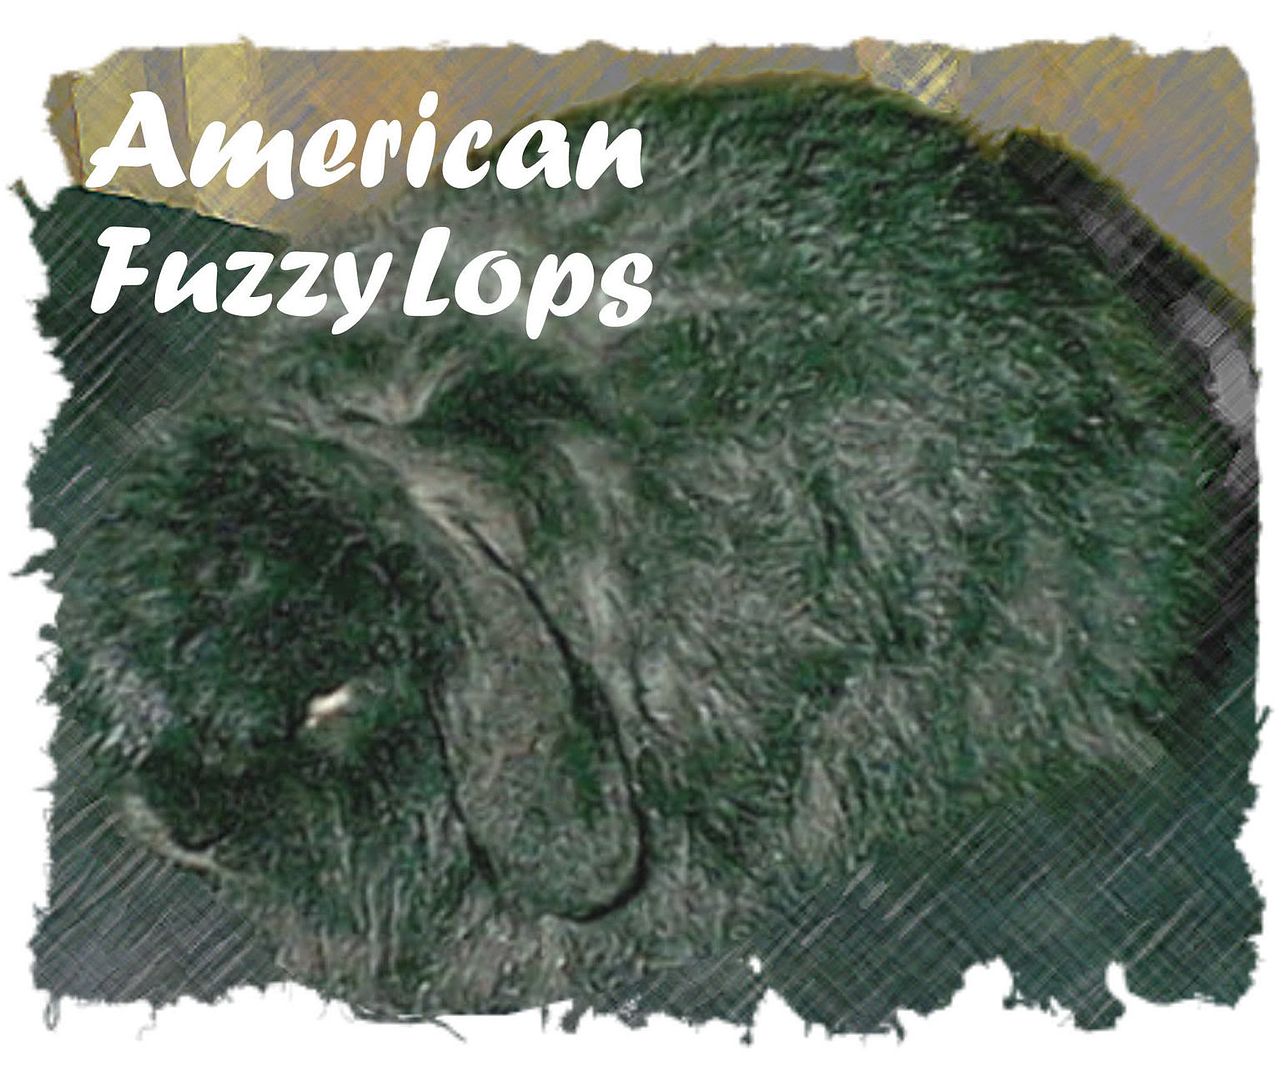 Our American Fuzzy Lops